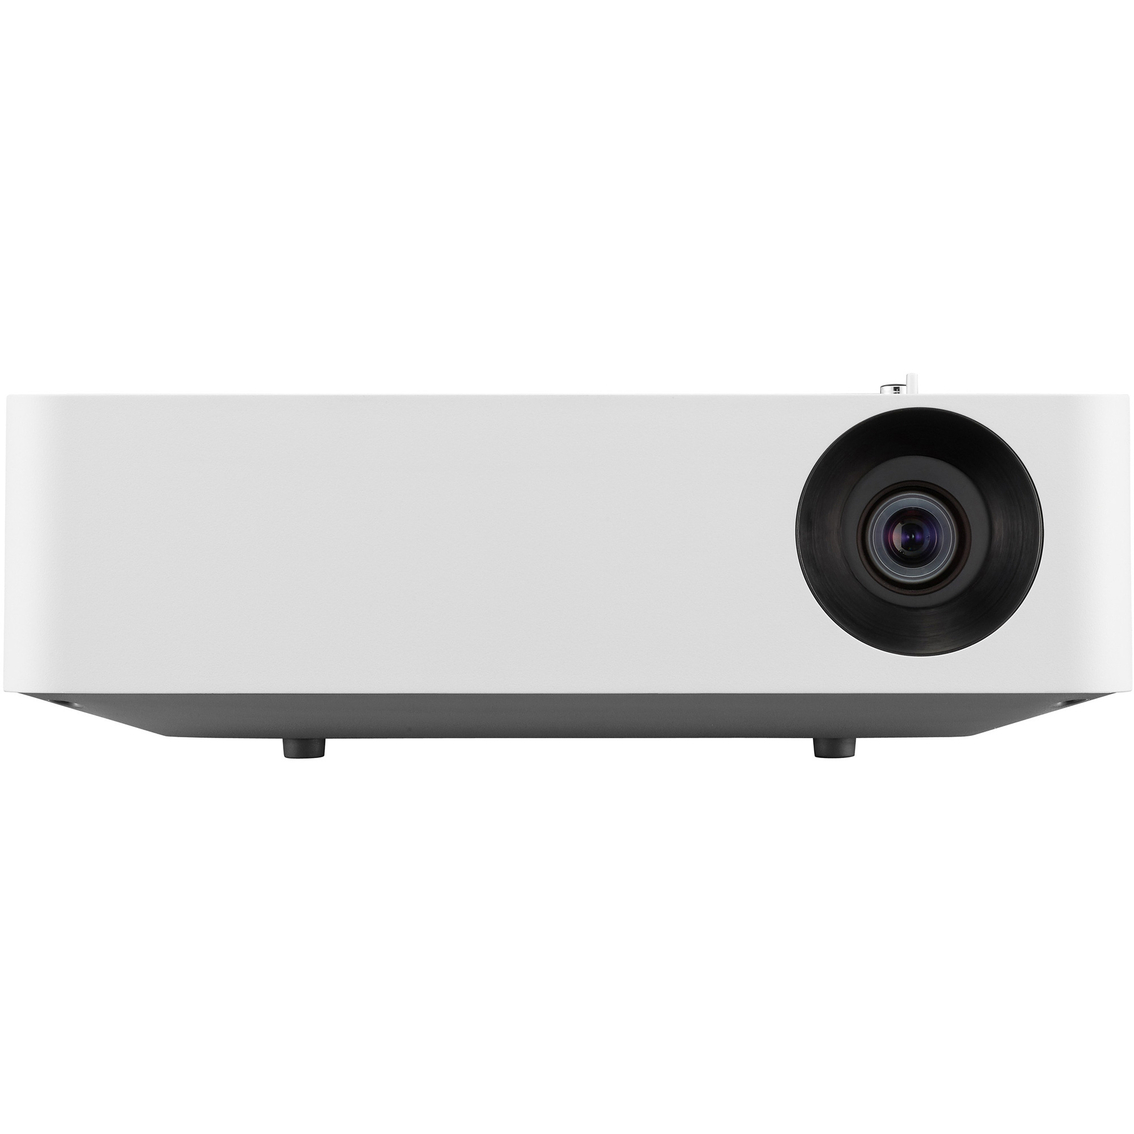 LG PF610P Full HD LED Portable Smart Projector - Image 8 of 10